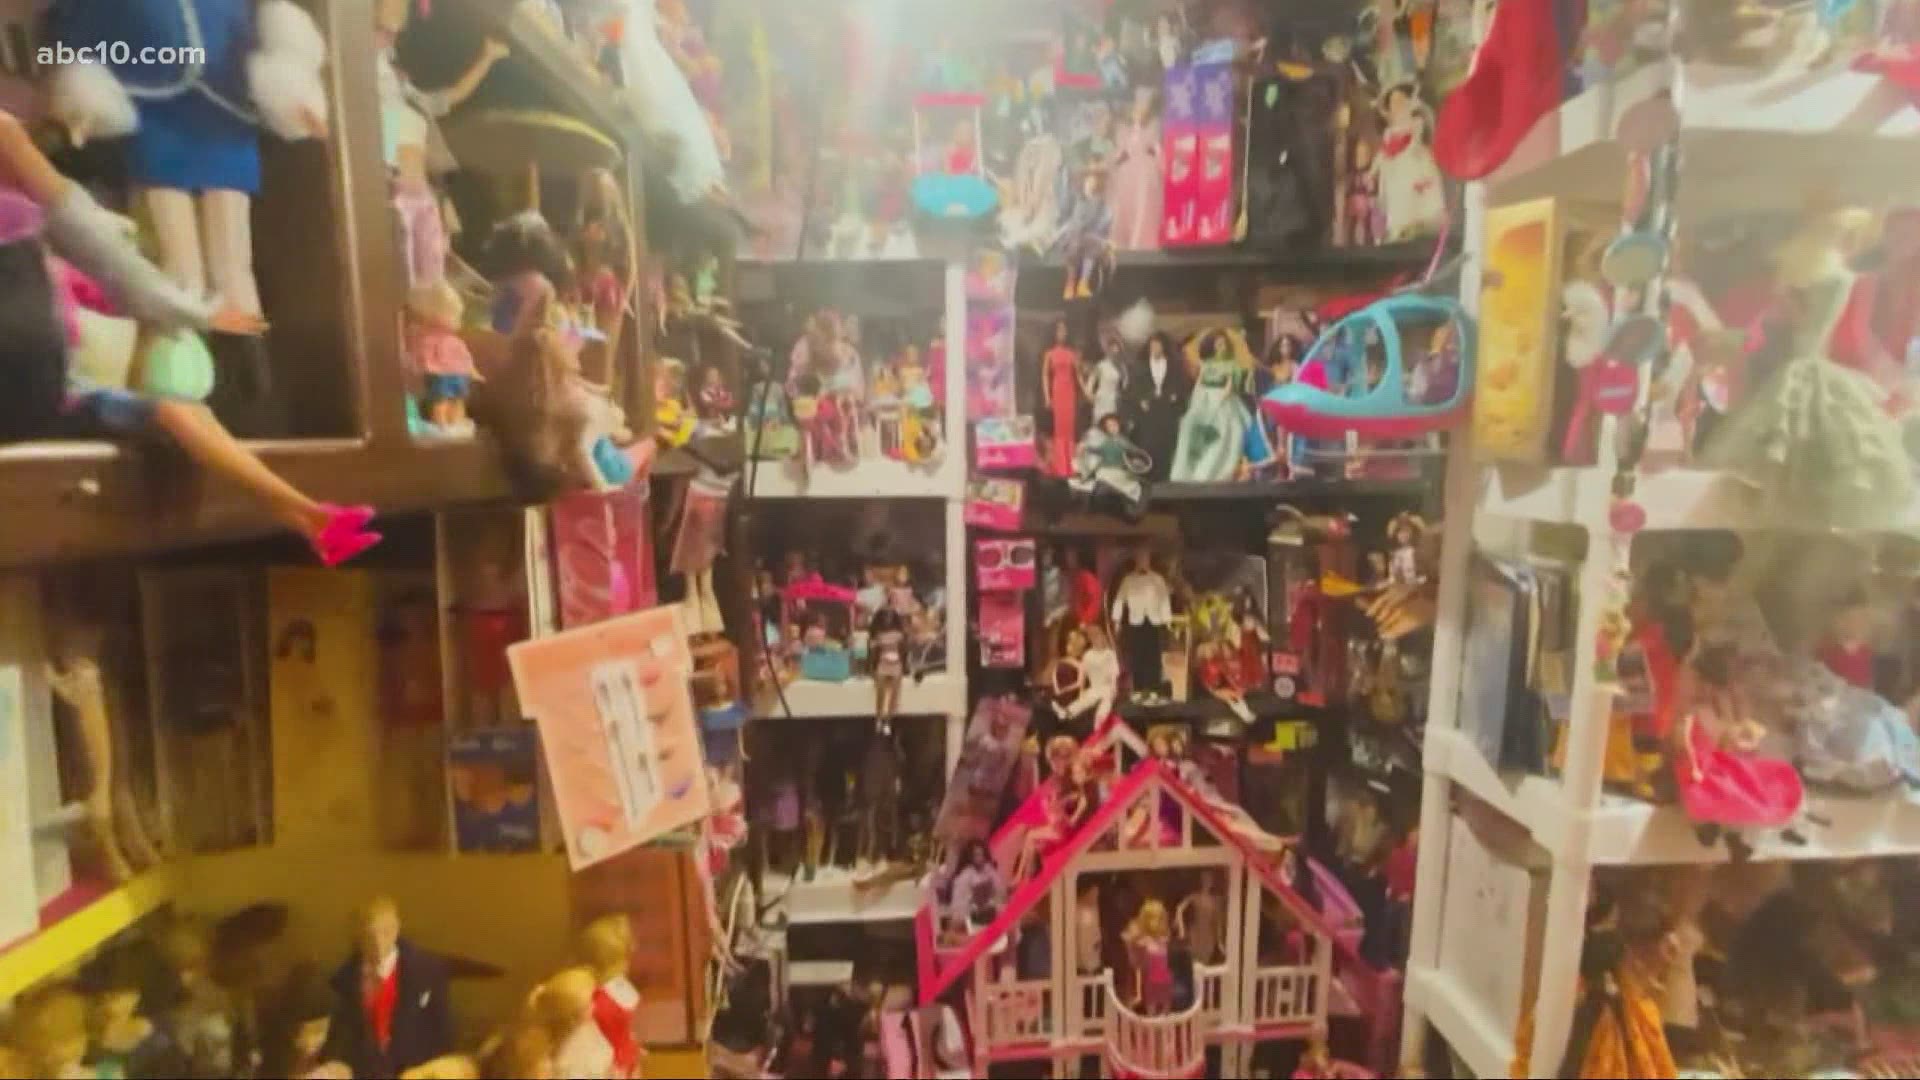 The extensive collection includes an original 1959 Barbie, worth at least $3,000.